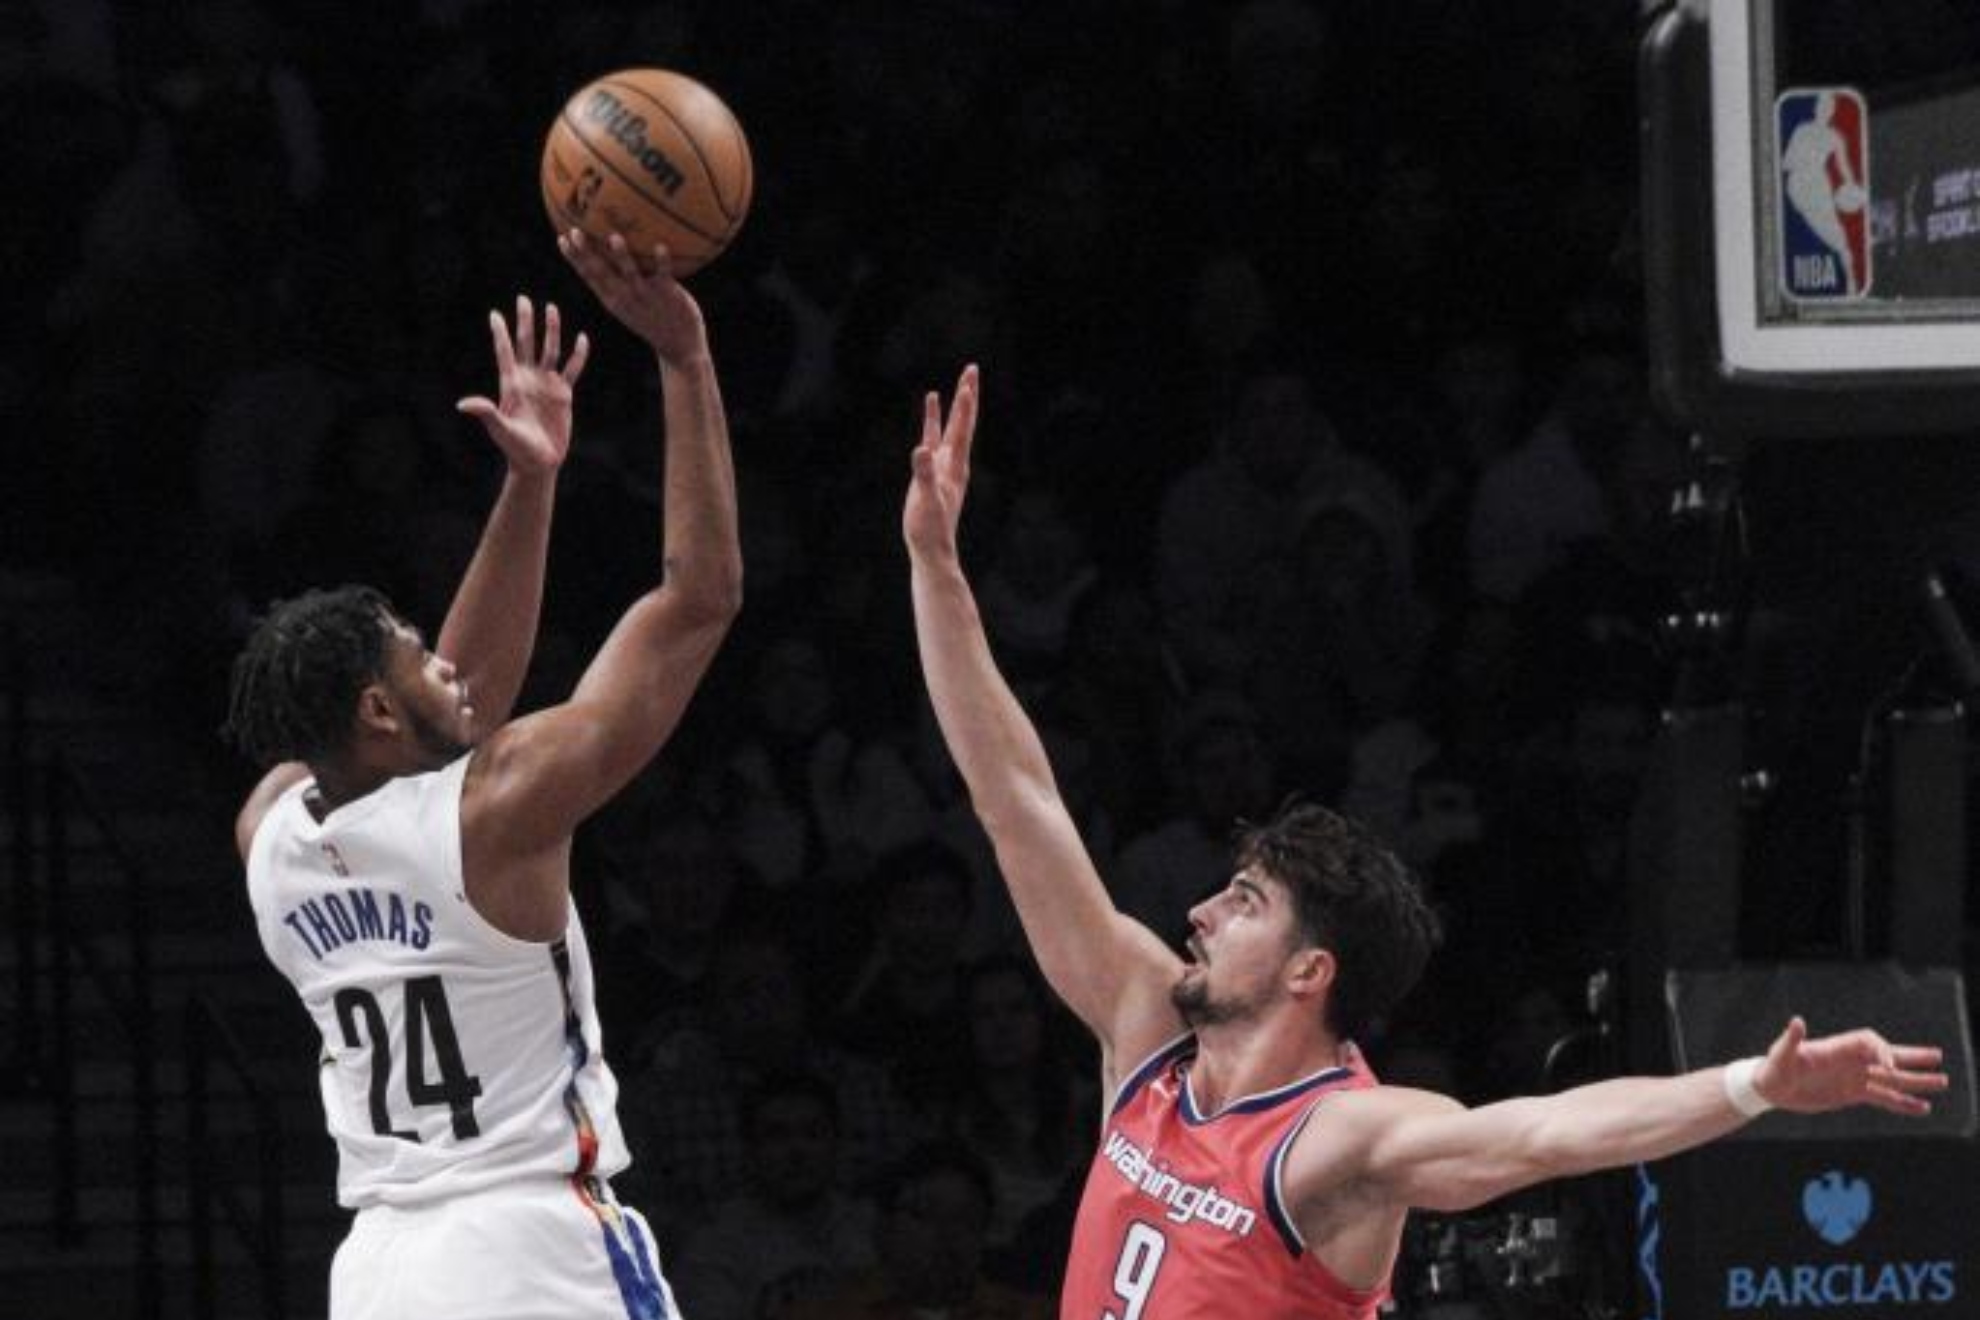 Brooklyn defeat the Wizards thanks to this illegal block